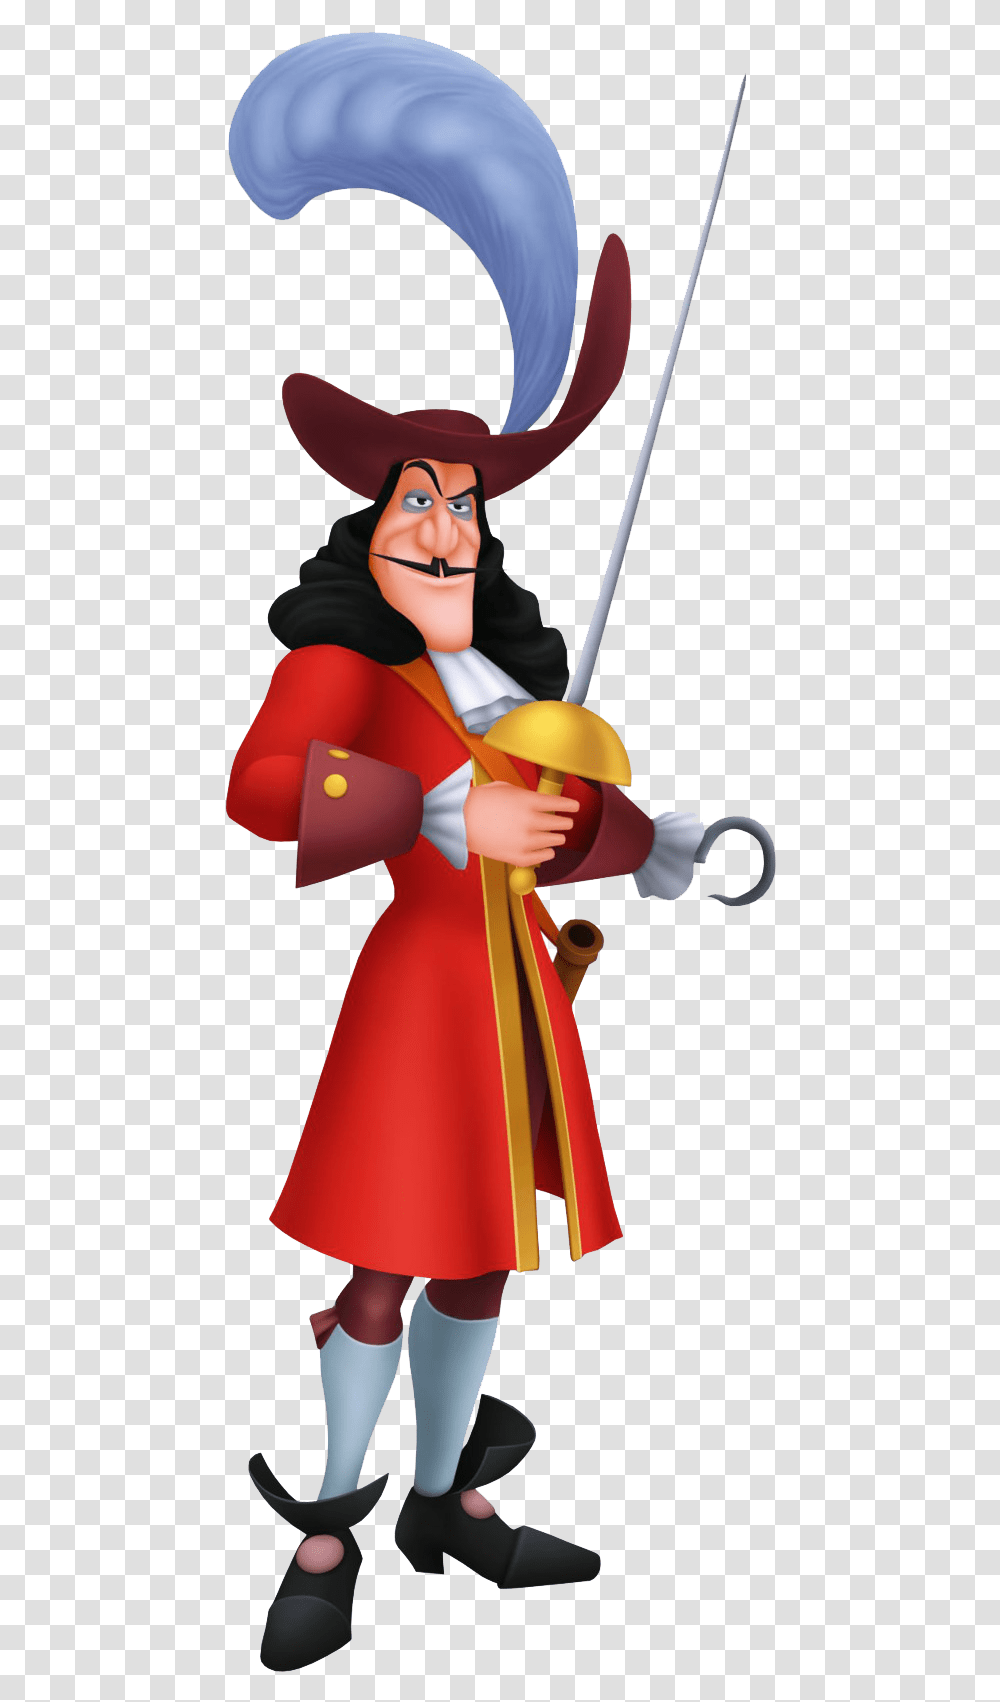 Captain Hook File Download Free All Captain Hook Kingdom Hearts, Person, Clothing, Costume, Figurine Transparent Png